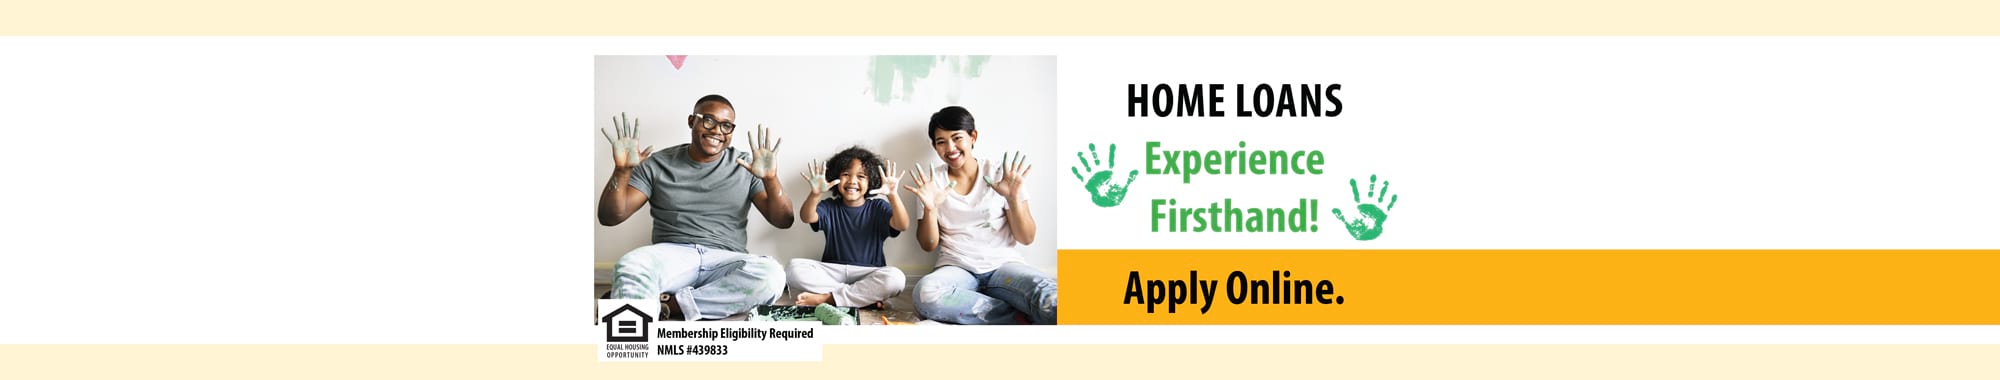 HOME LOANS - Experience Firsthand! Apply Online. Membership Eligibility Required. Equal Housing Opportunity NMLS # 439833